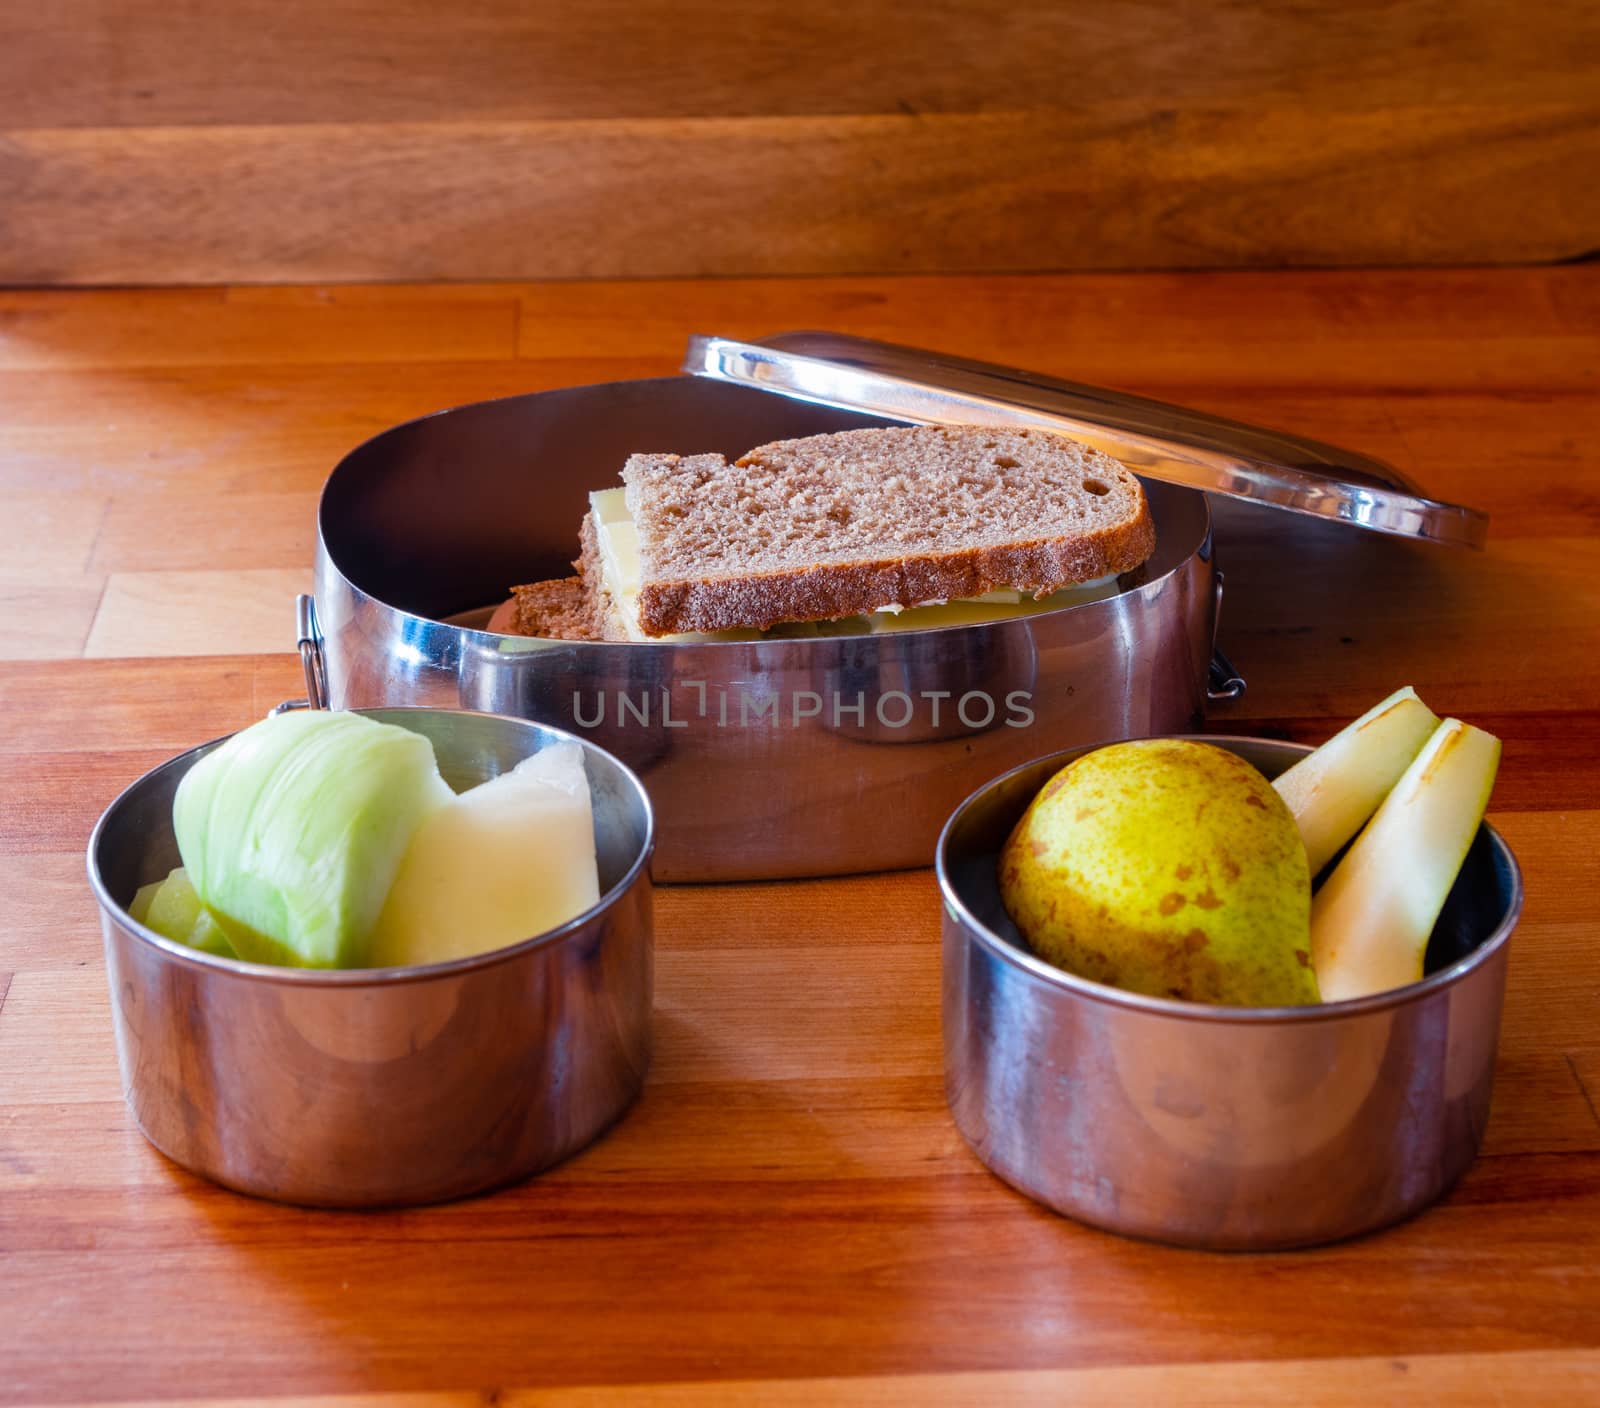 school lunch packed in stainless steel lunchbox on wooden surface by MarcoWarm